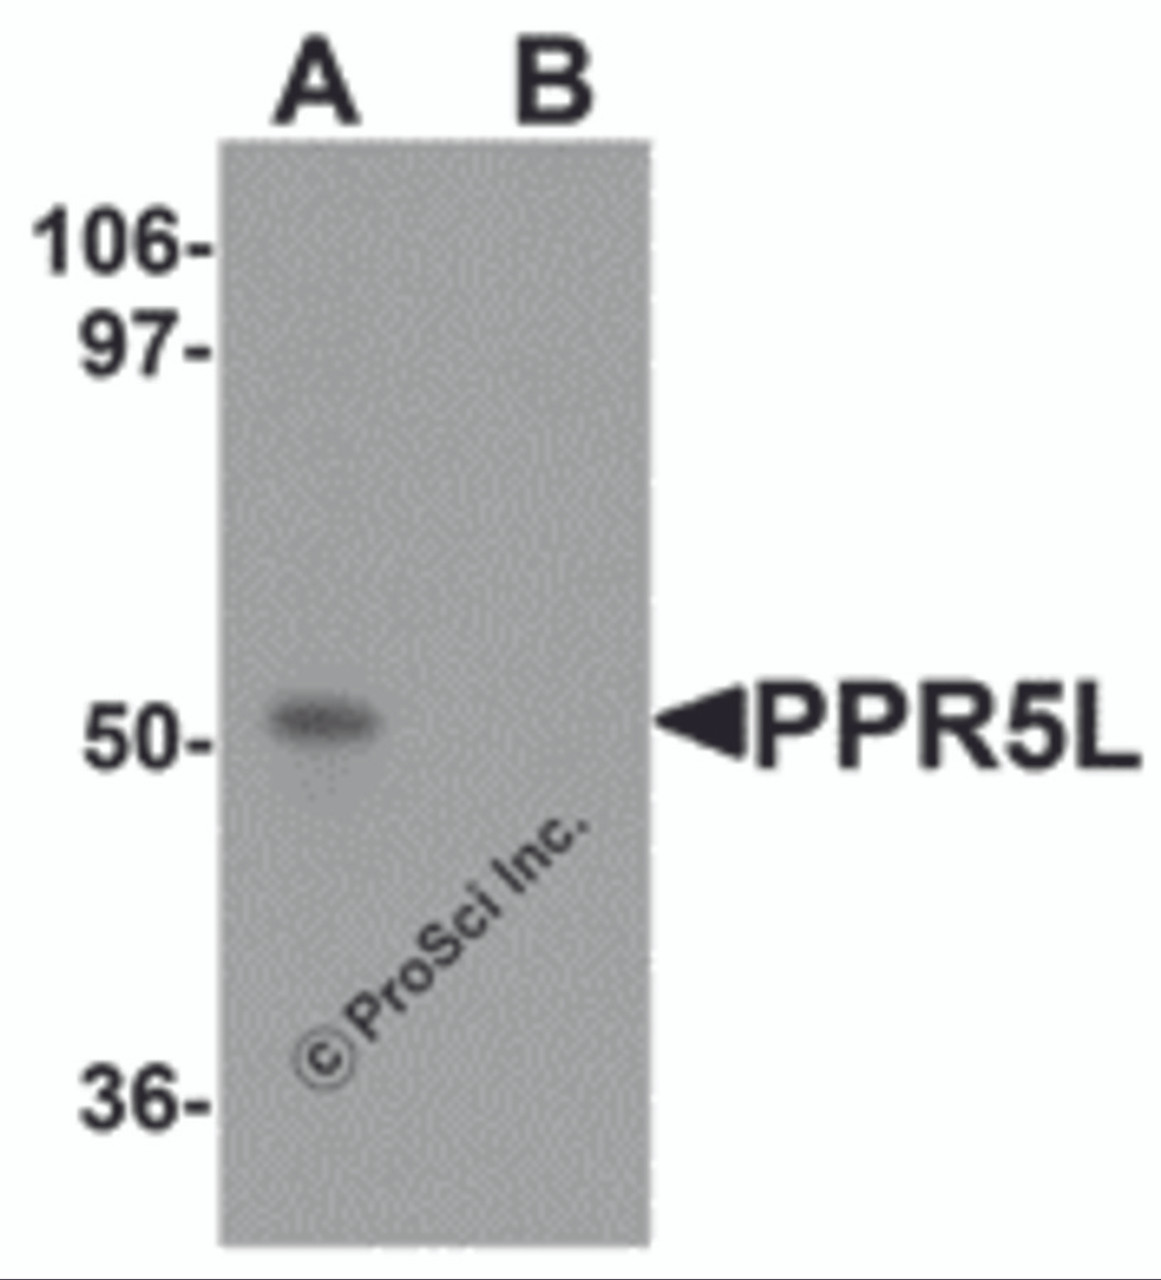 Western blot analysis of PRR5L in 3T3 cell lysate with PRR5L antibody at 1 &#956;g/mL in (A) the absence and (B) the presence of blocking peptide